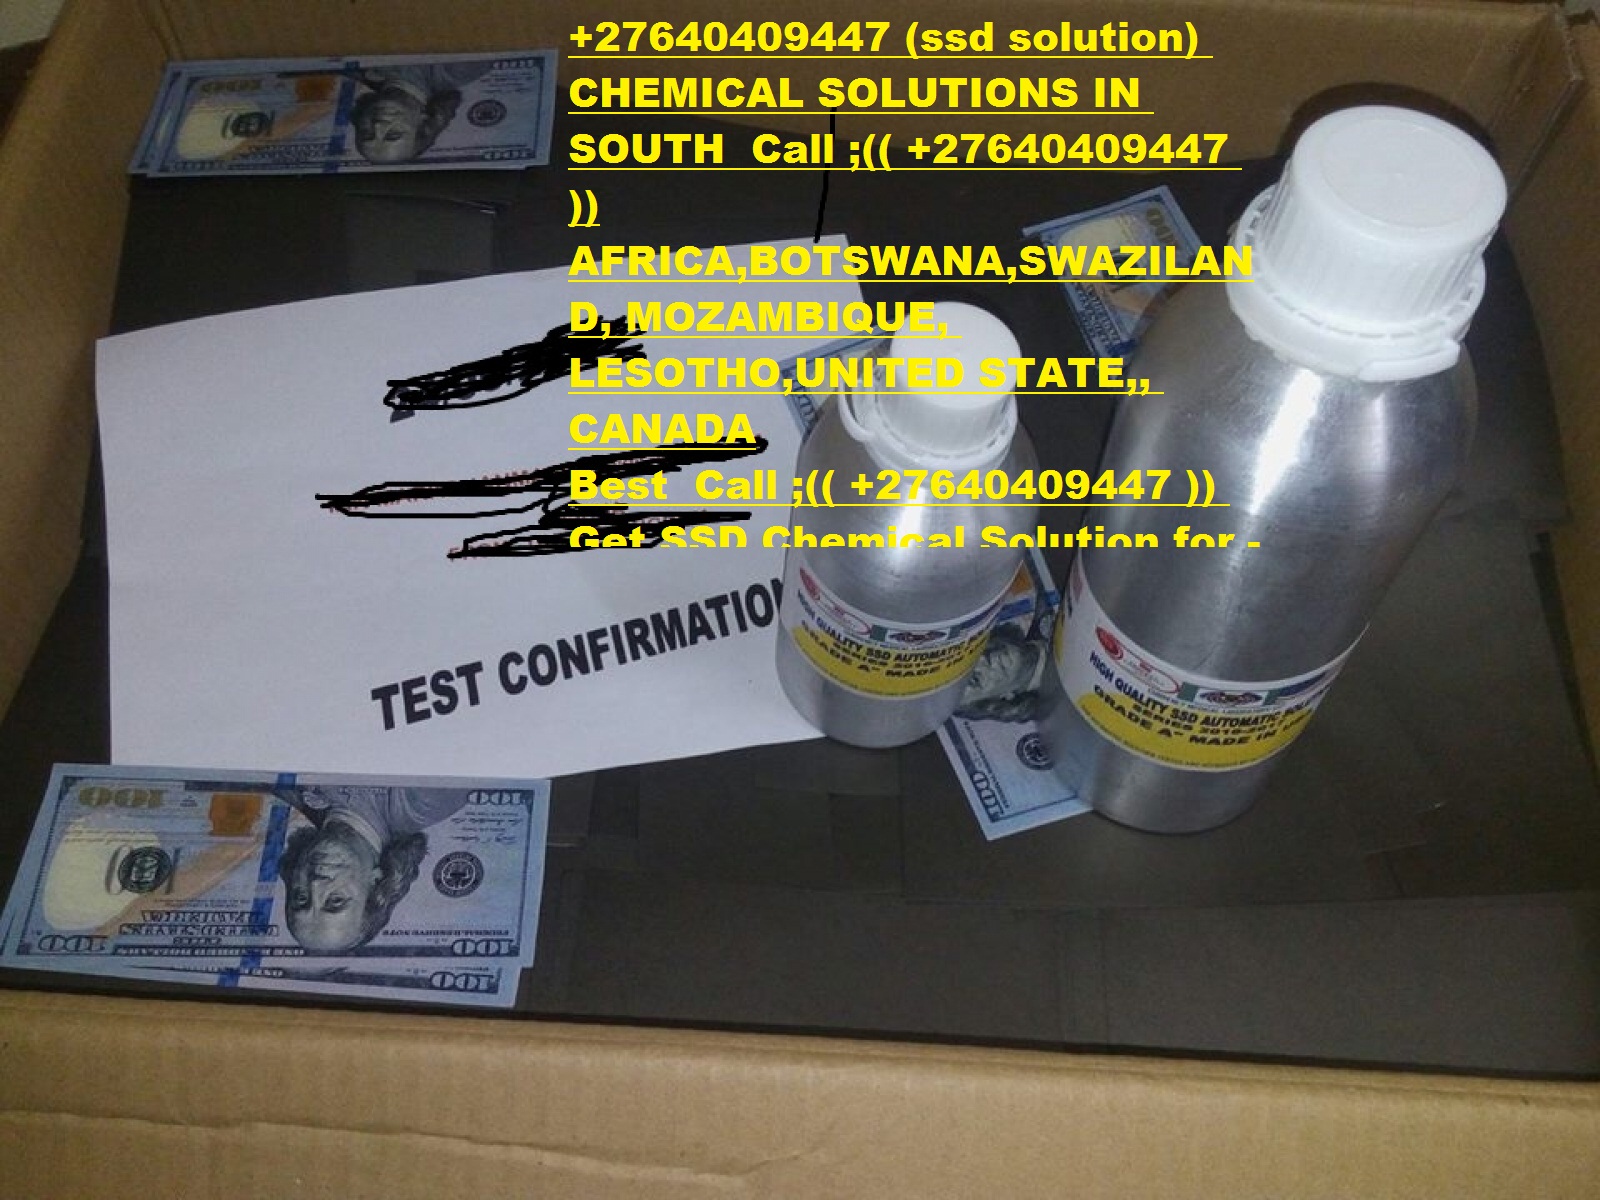 +27640409447 Automatic Ssd Solution And Activation Powder for sale in South Africa  400